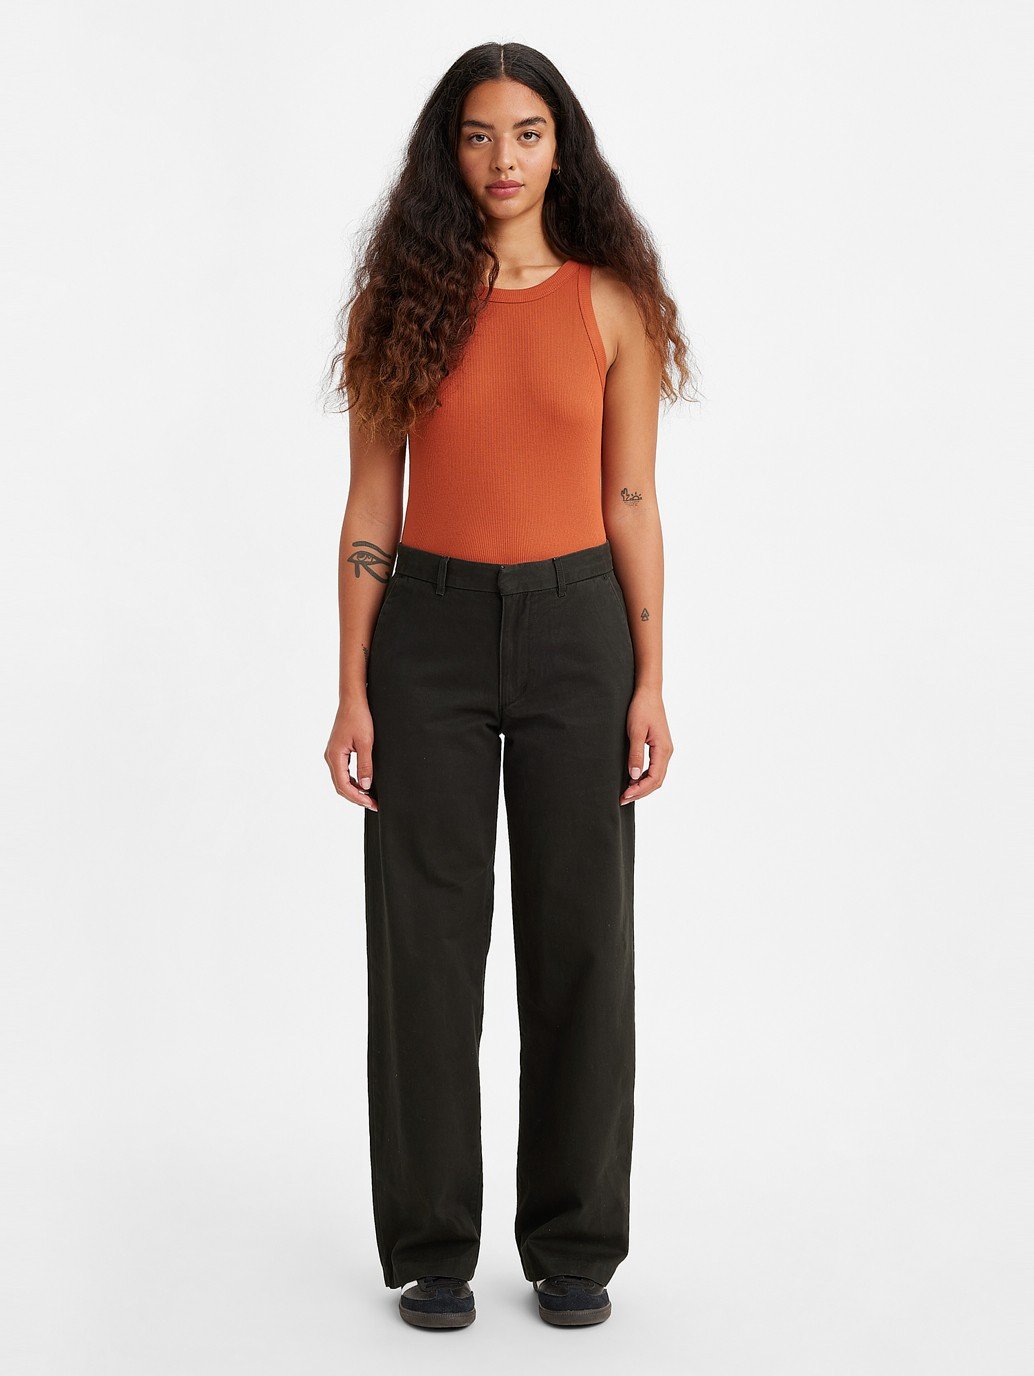 Buy Brown Trousers & Pants for Women by SAM Online | Ajio.com-anthinhphatland.vn